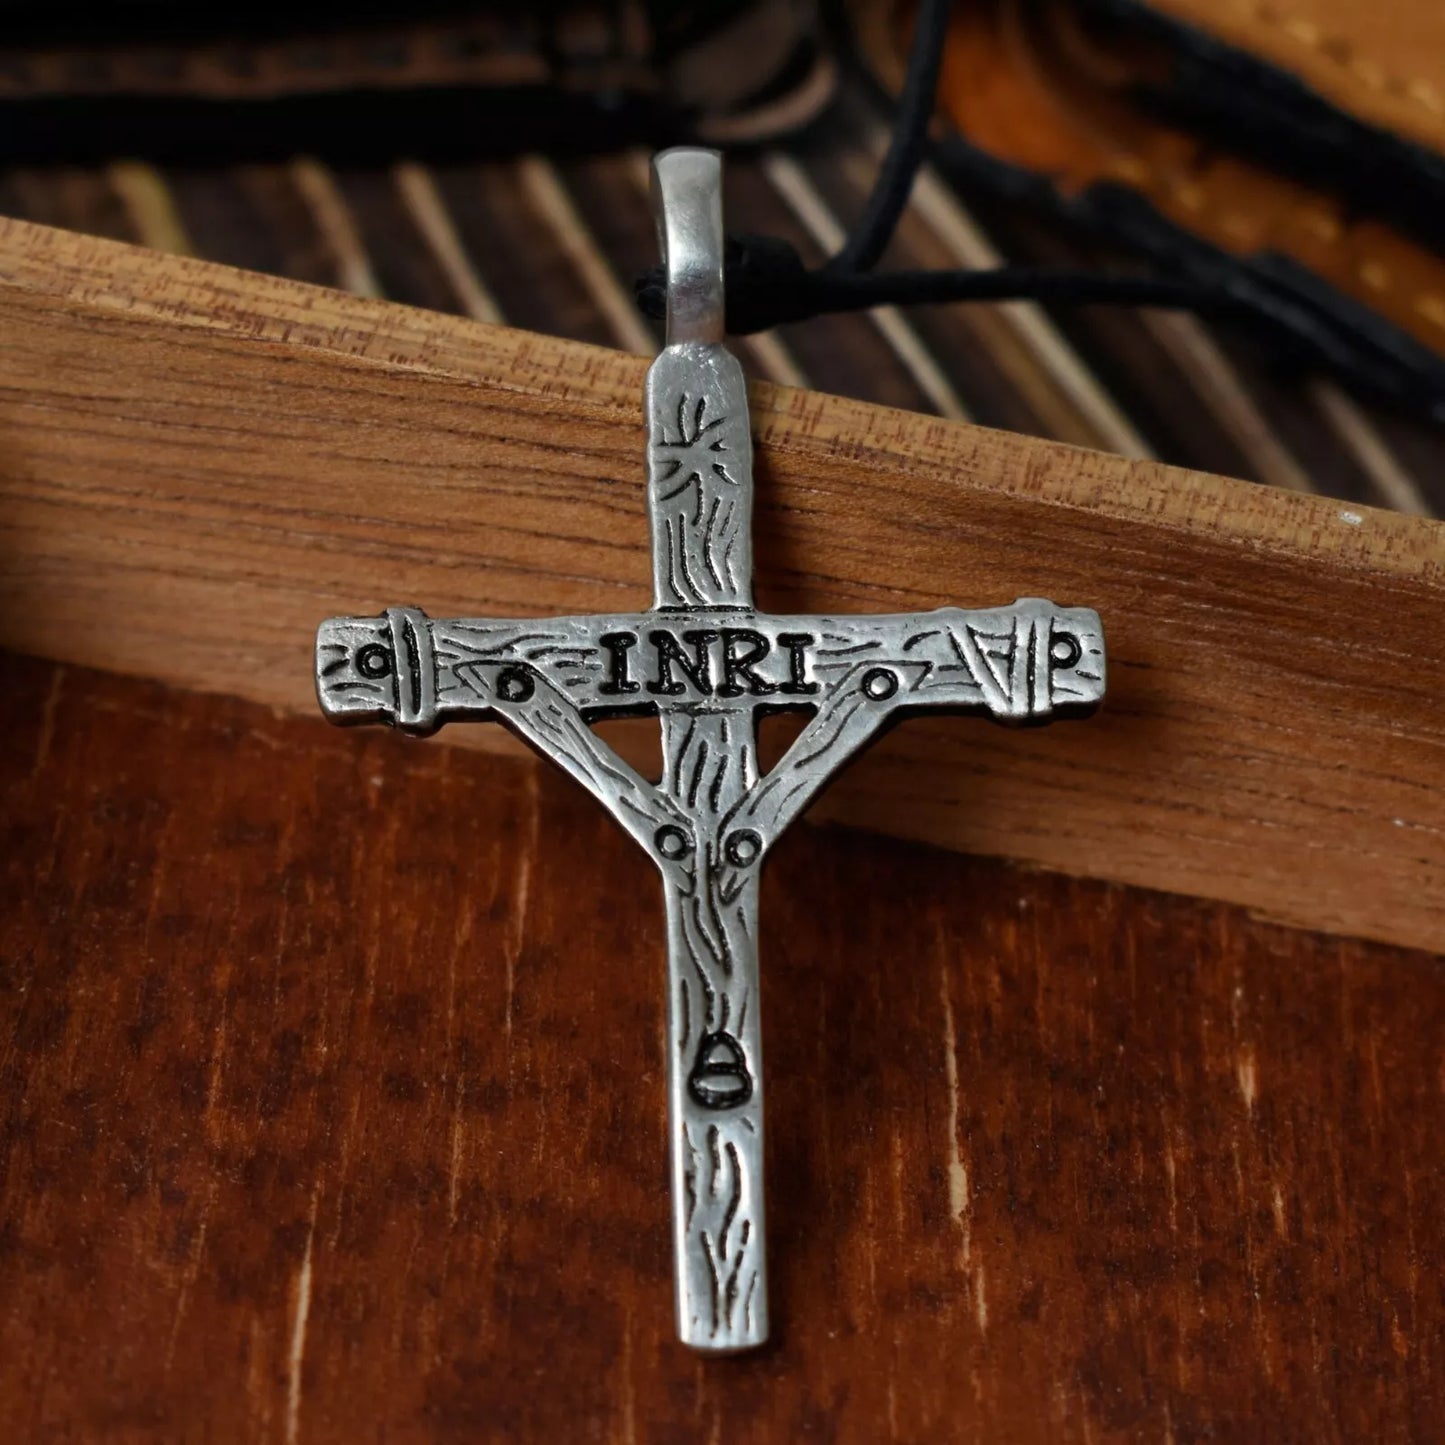 Antique Inri Christian Cross Silver Pewter Charm Necklace Pendant Jewelry